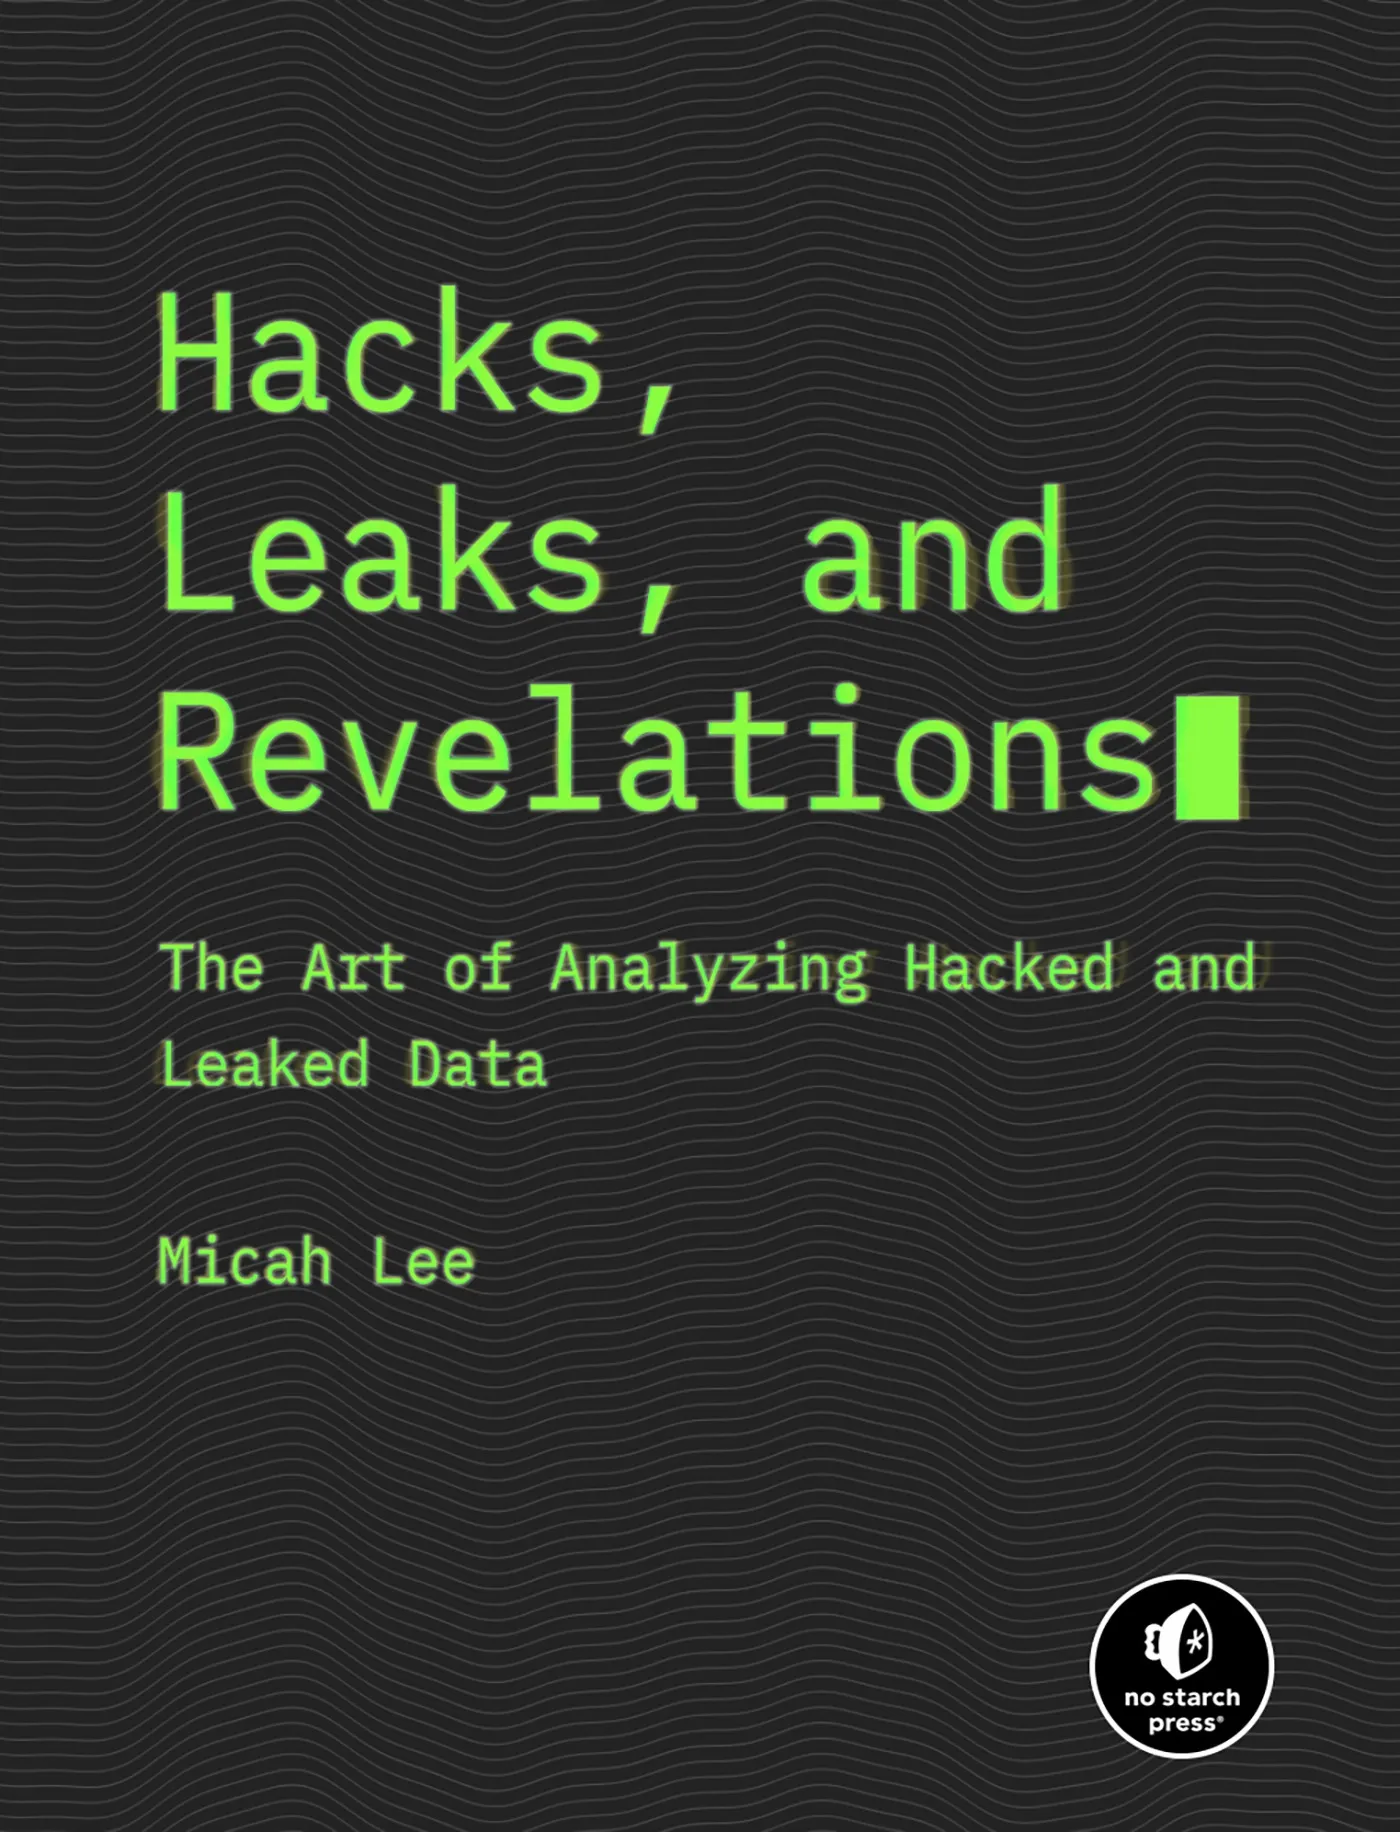 A cover image of the book titled Hacks, Leaks, and Revelations